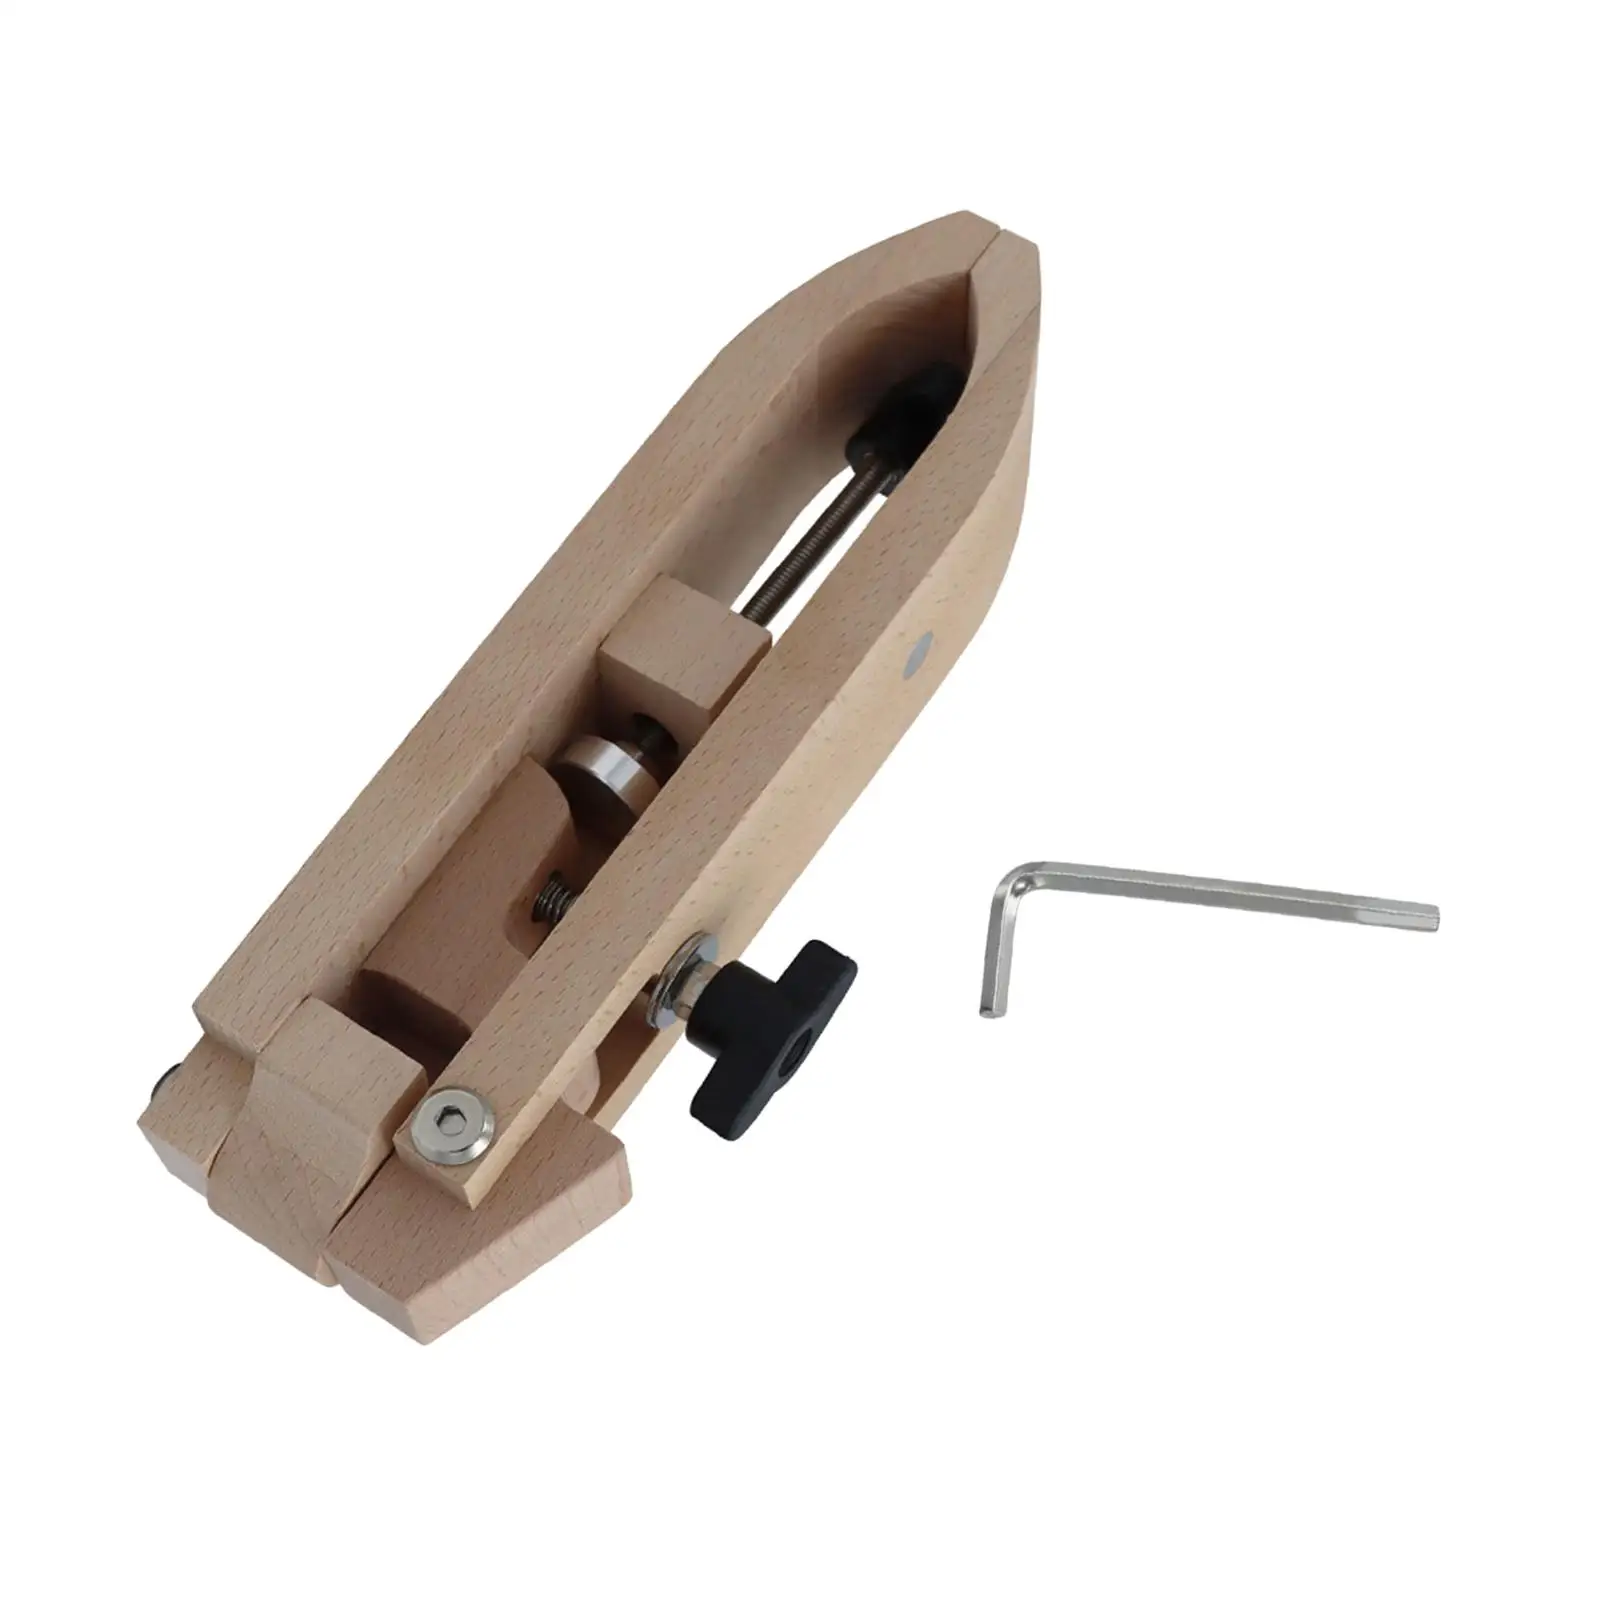 Wooden Sewing Leather Seam Vise Leather Craft Tabletop Gripper Rotation Stitching Ponies Tools